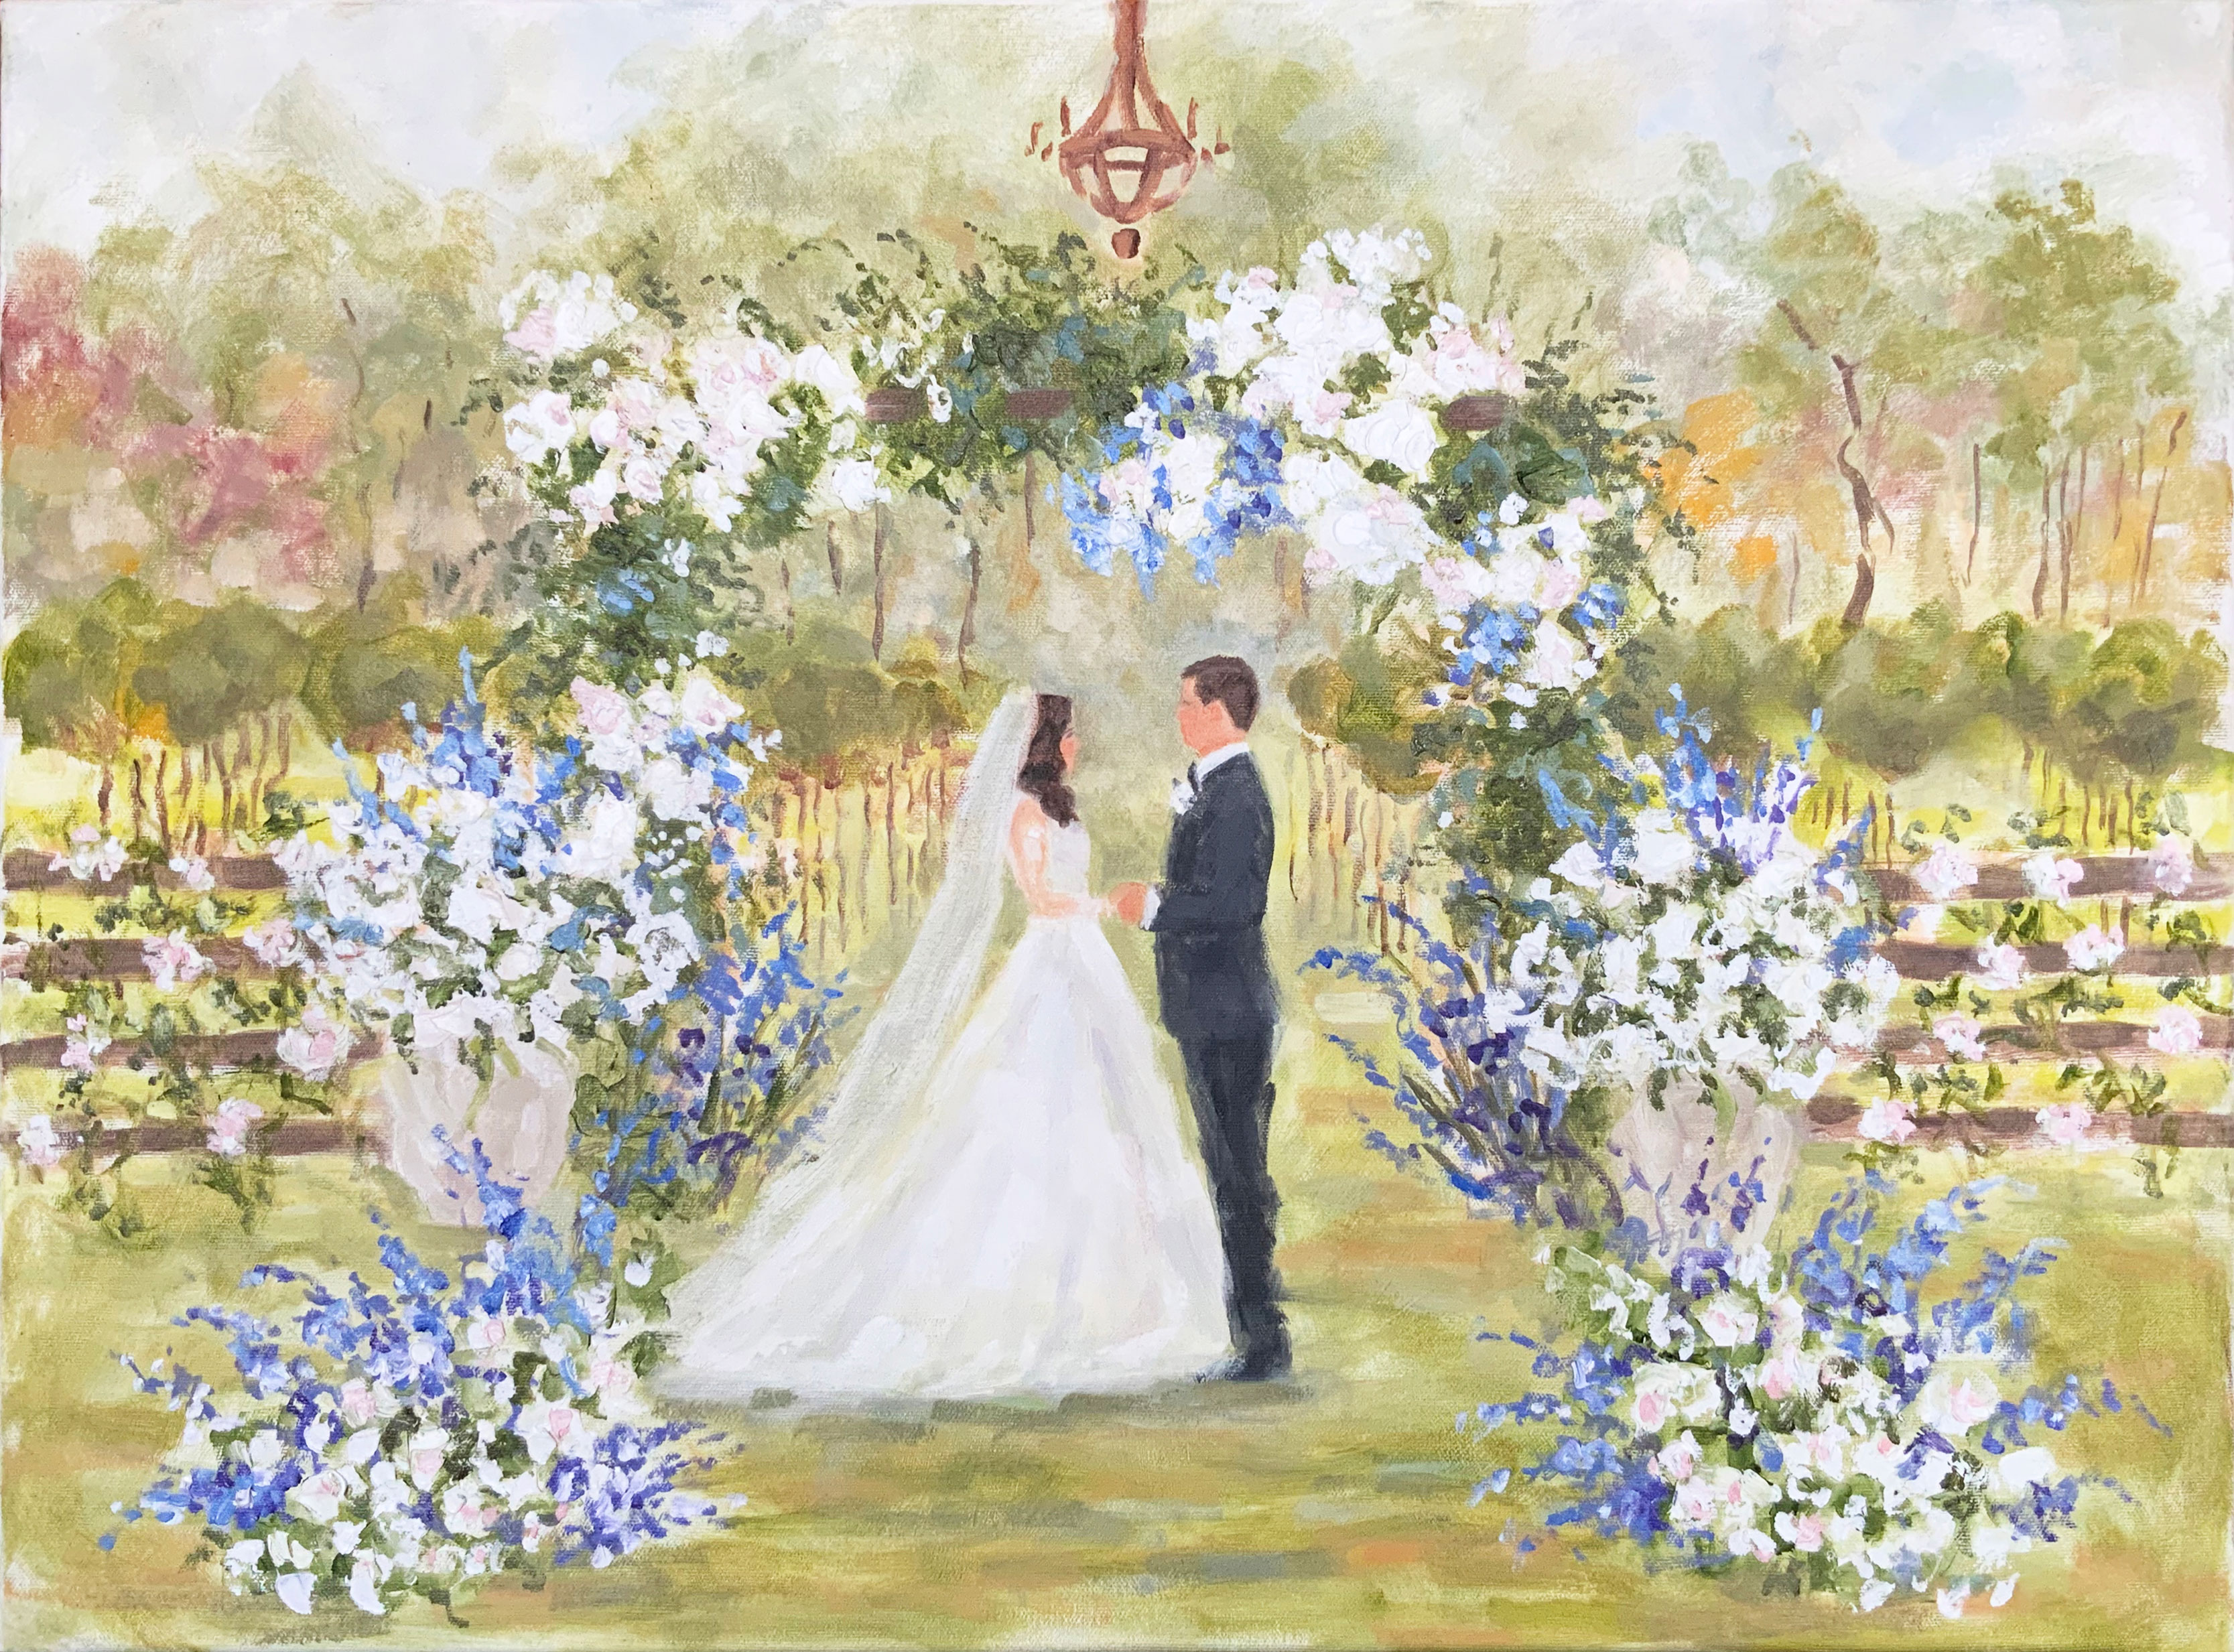 Wedding Ceremony live painting in family's vinyard by Susan Moss Cooper